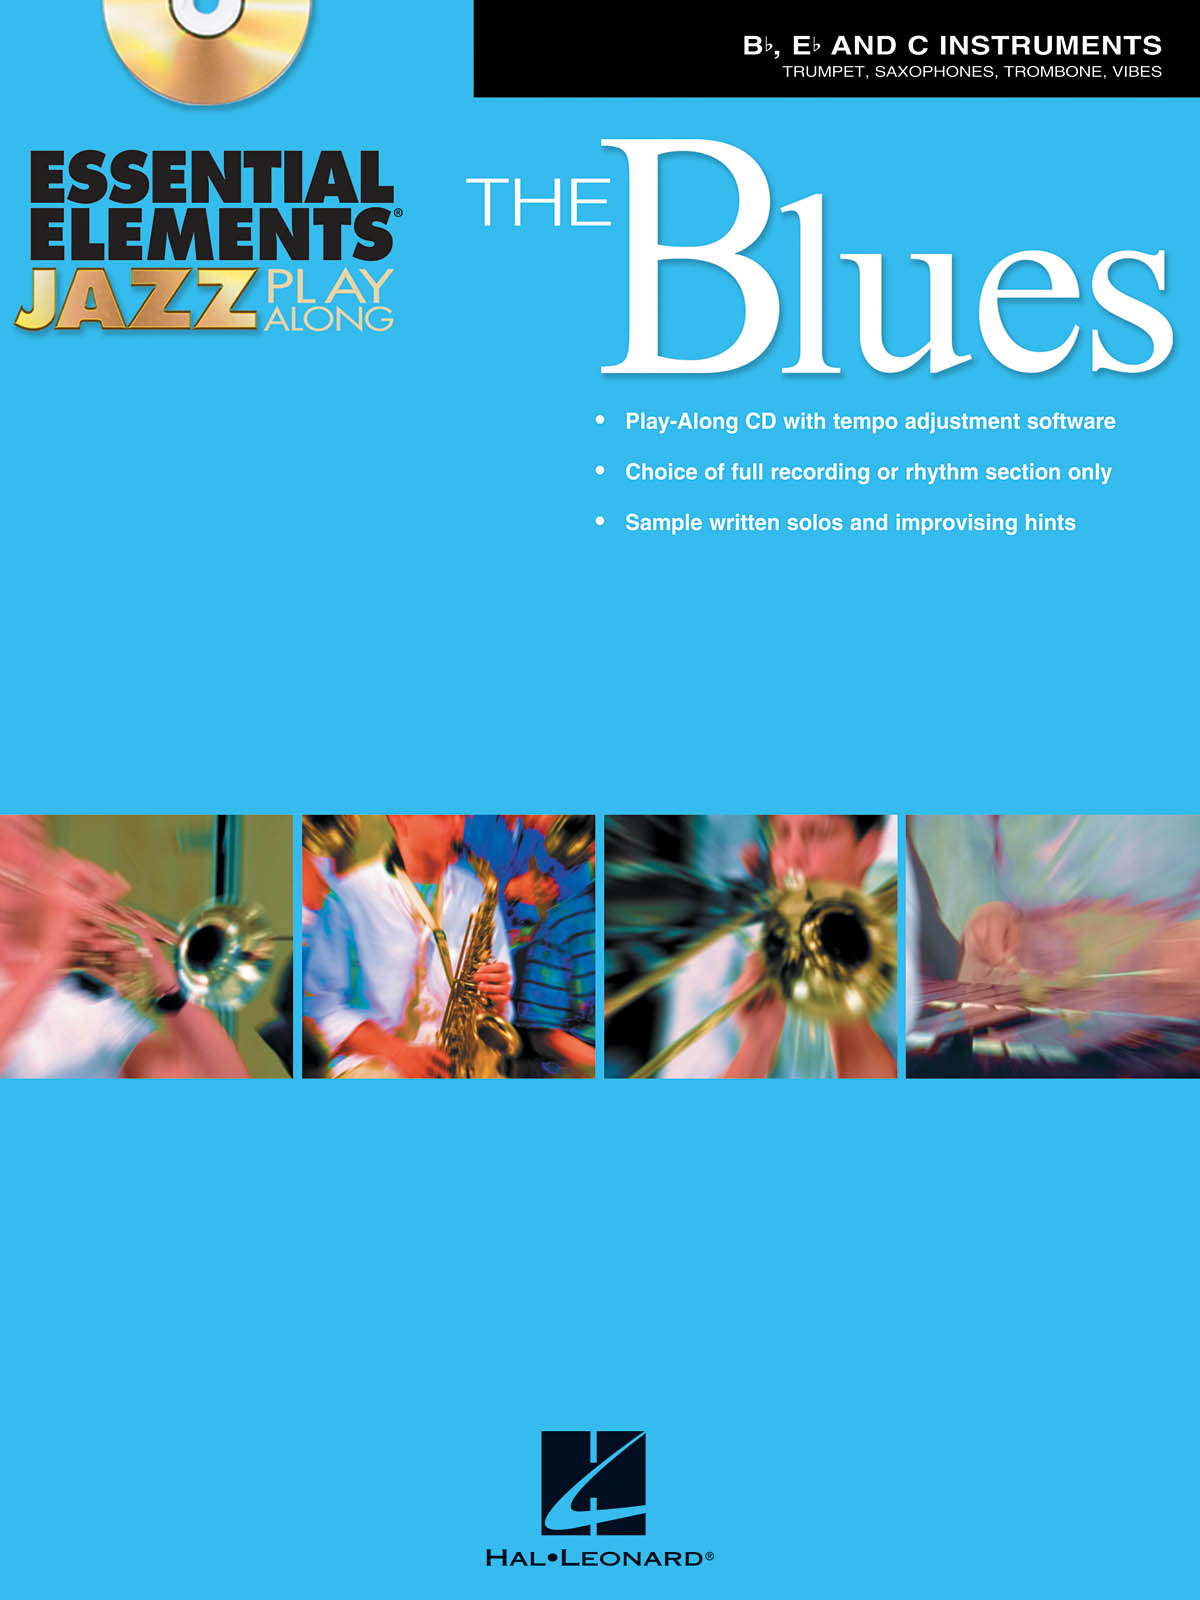 Essential Elements Jazz Play Along – The Blues